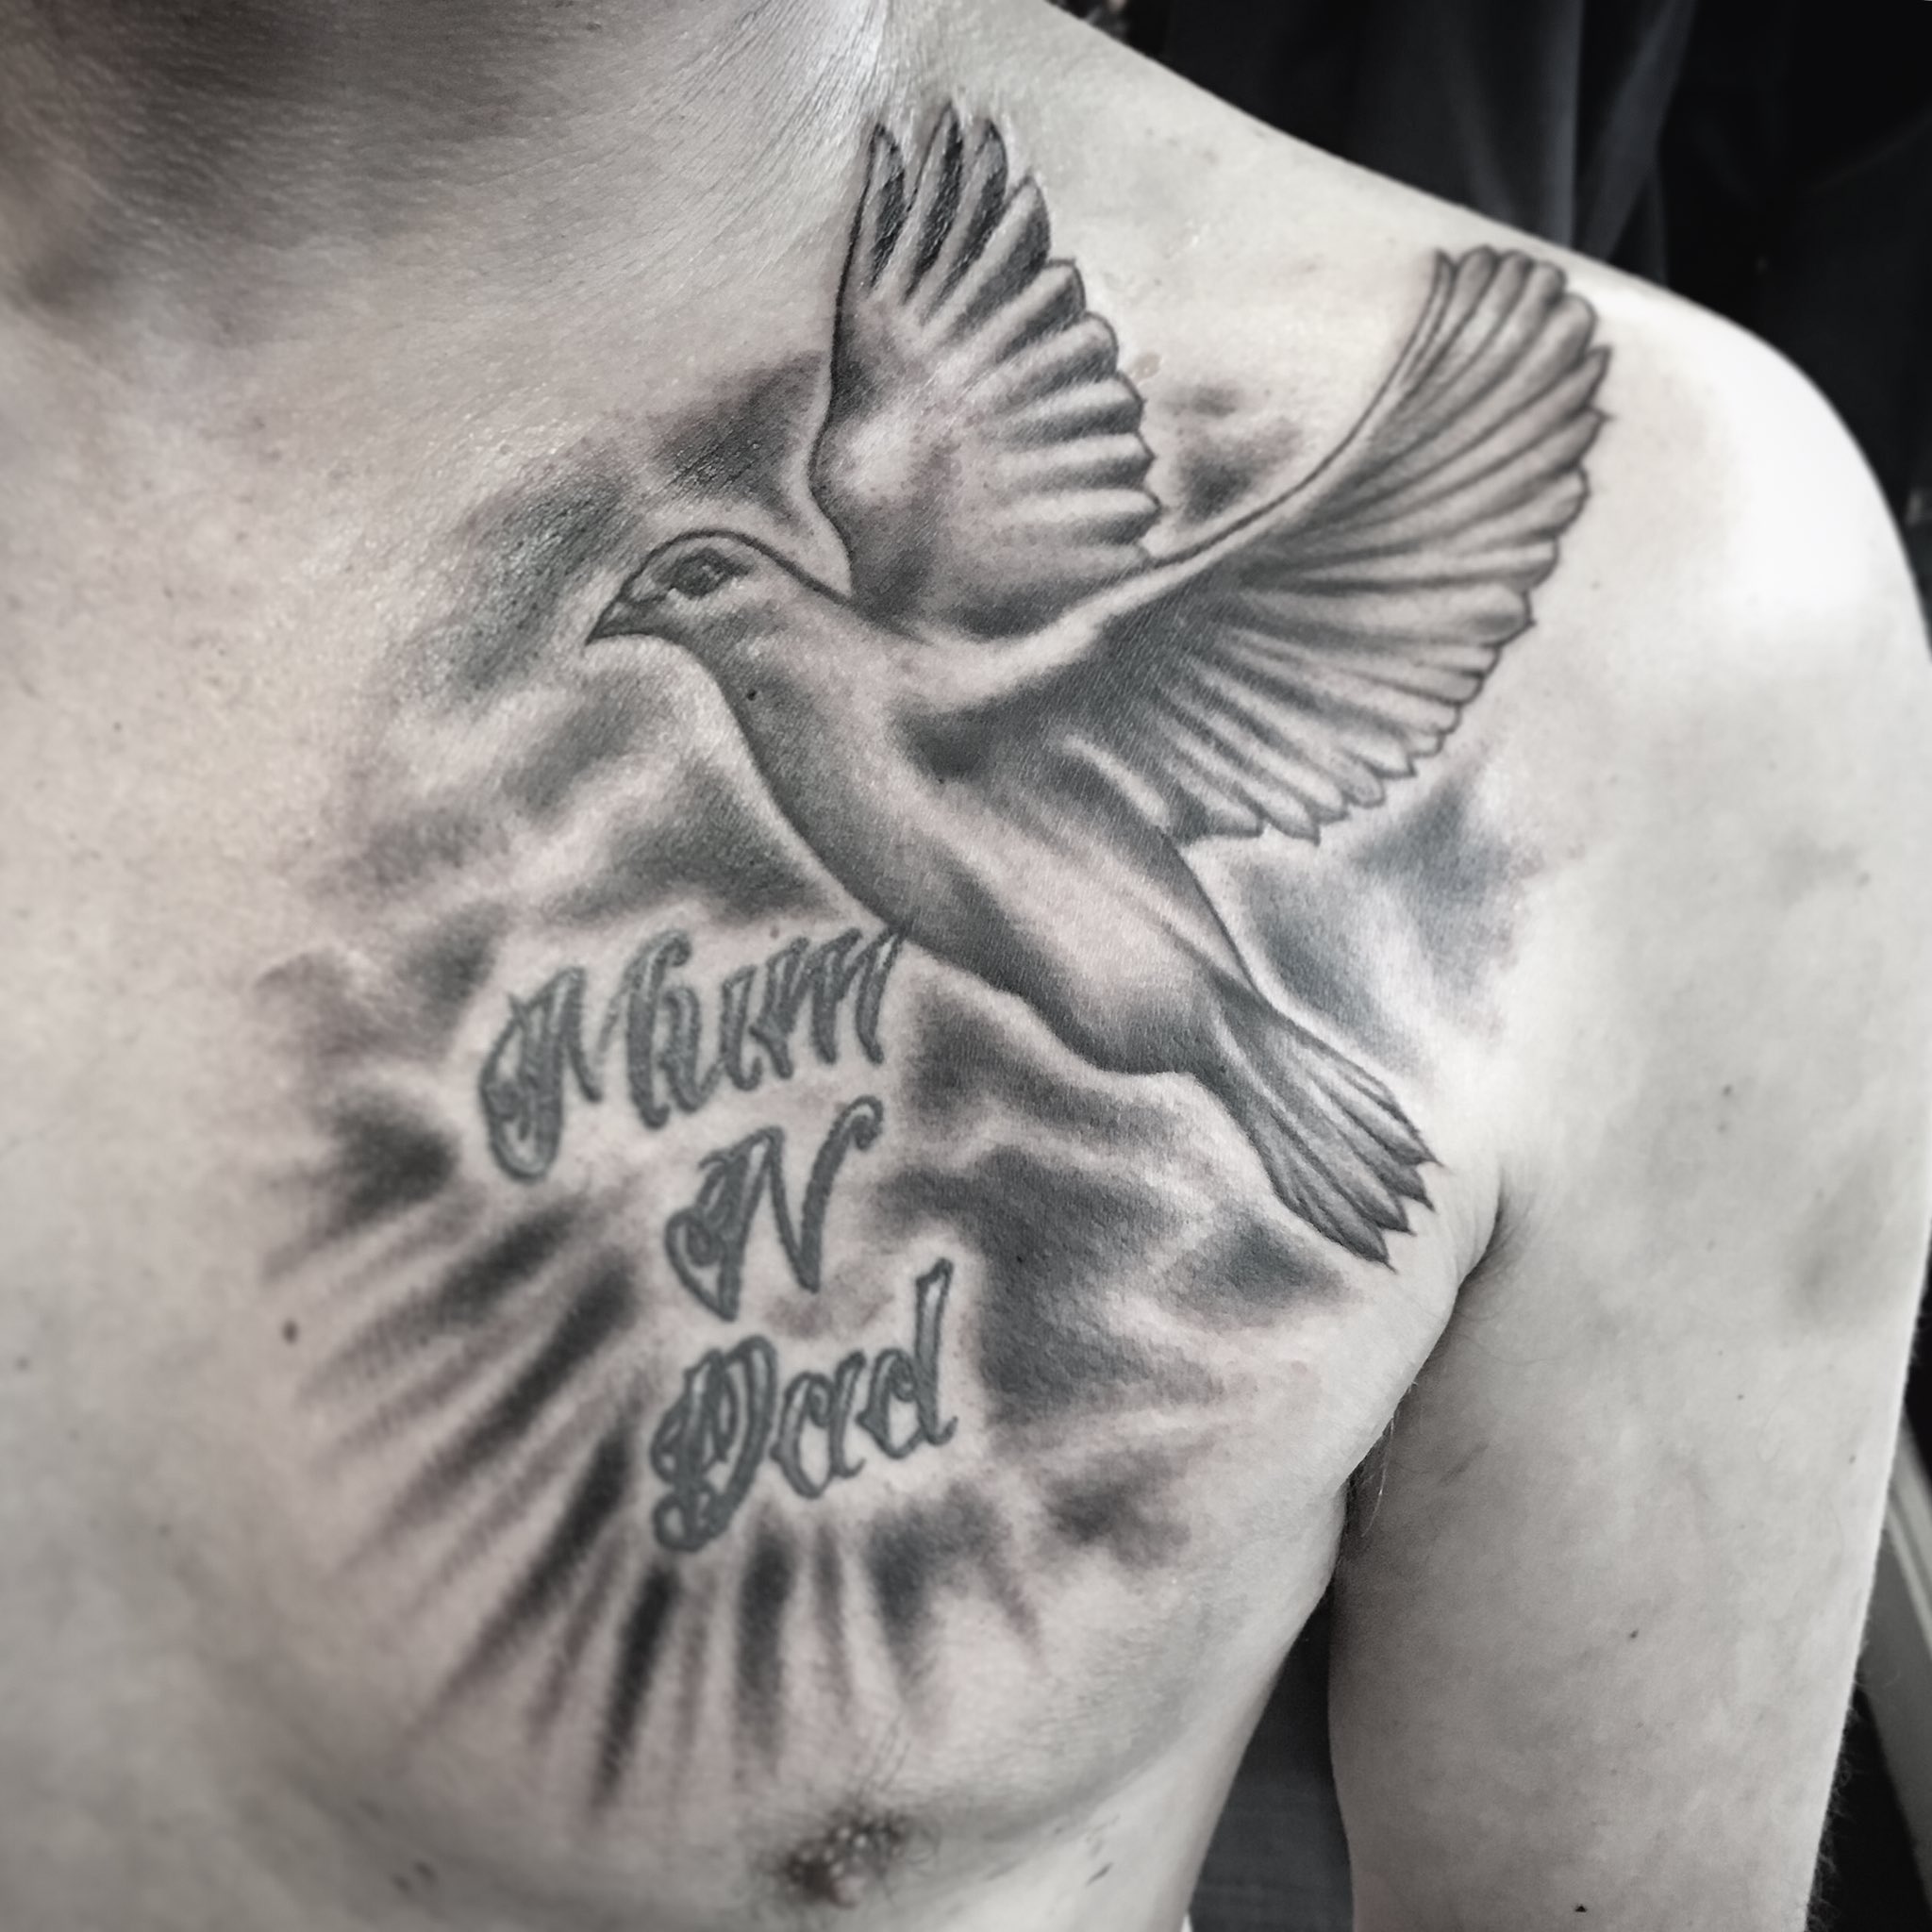 Tattoo uploaded by Tattoodo  Where doves fly by Lil B LilB realistic  illustrative linework rose flower leaves dove bird wings feathers  clappers Jesus prayer praying religious clouds sun blackandgrey  tattoooftheday  Tattoodo